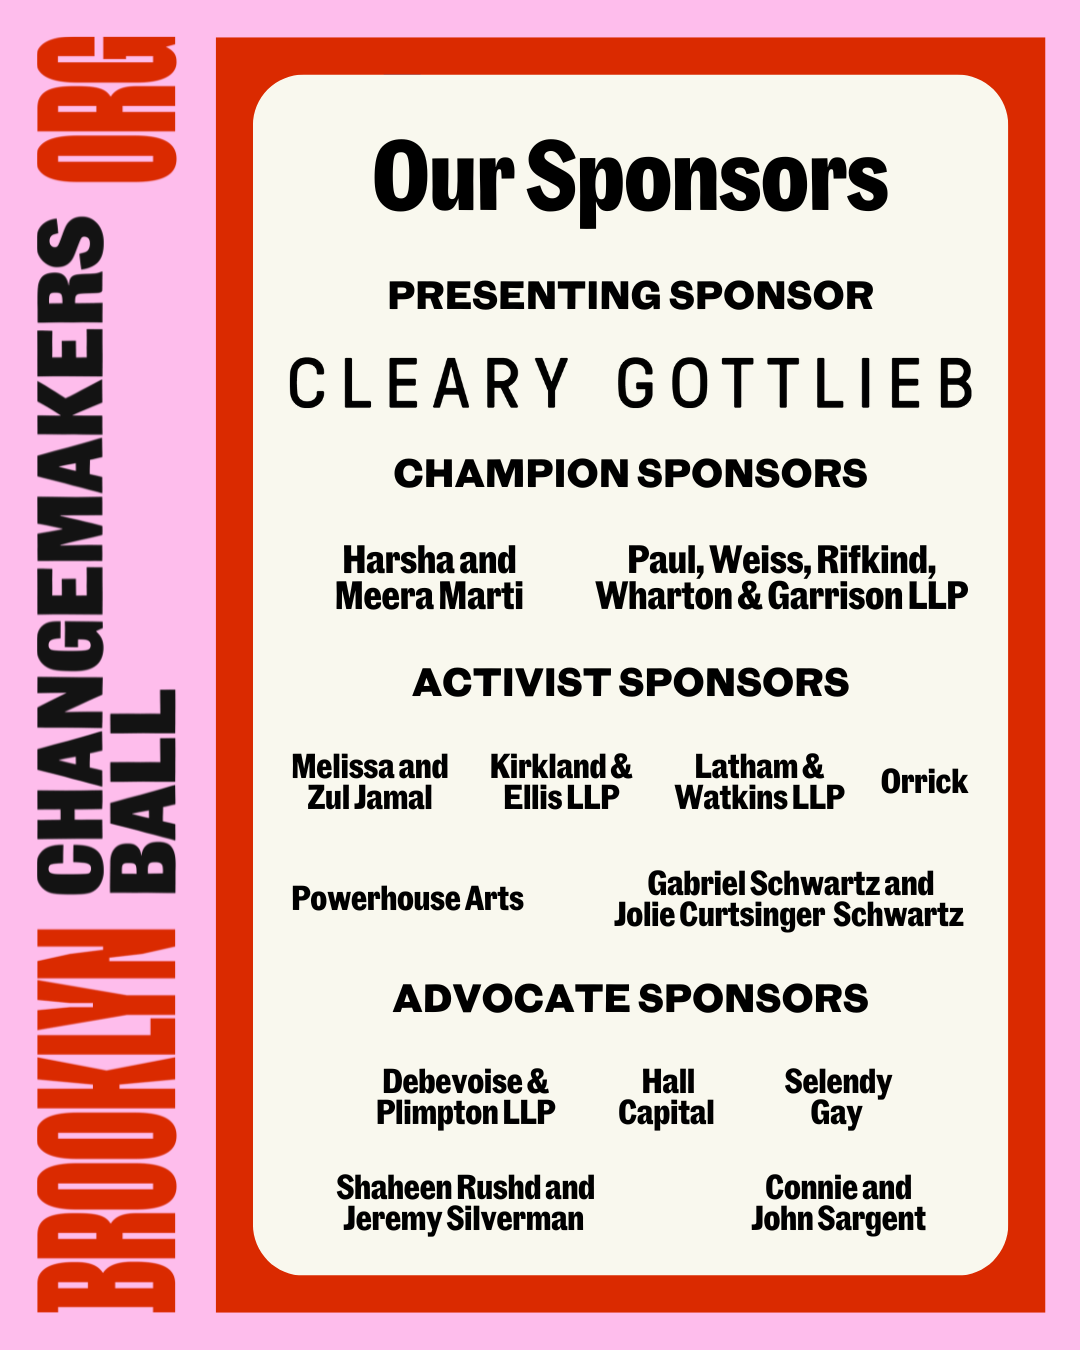 Sponsor list for the Brooklyn Changemakers Ball, organized by hierarchy: Presenting Sponsor: Cleary Gottlieb, Champion Sponsors, Activist Sponsors, Advocate Sponsors. Other text: "Brooklyn Changemakers Ball.